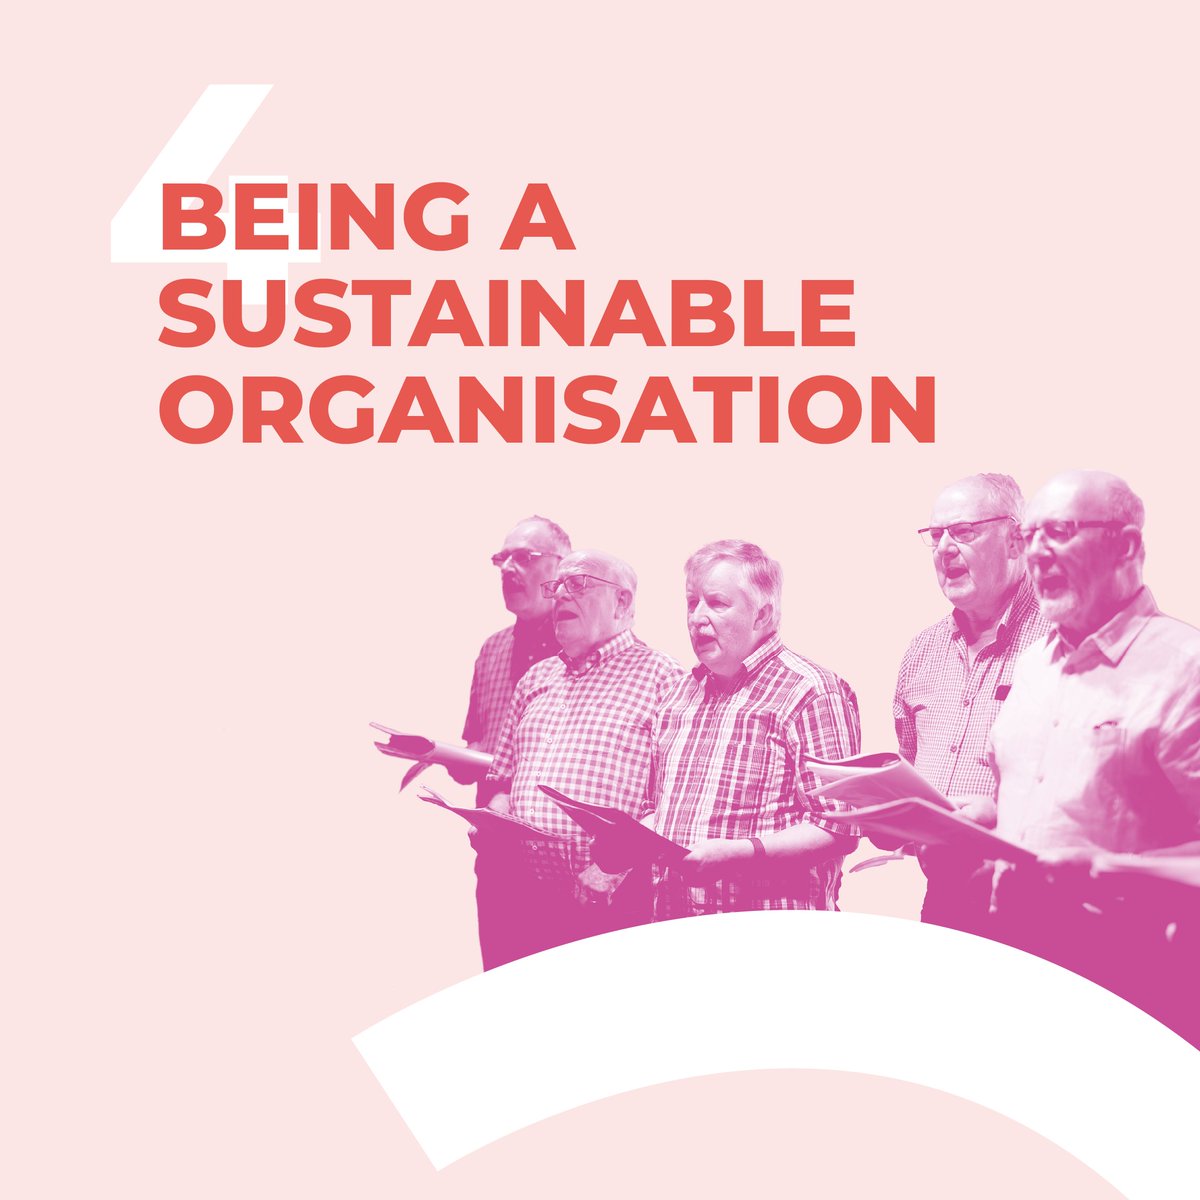 💫Being a Sustainable Organisation 💫 Sing Ireland is committed to dynamic growth & attracting new resources to fortify existing programmes. Strategy 2024-2029 is here: eu1.hubs.ly/H08Sd570 #enhancinglivesthroughsinging #groupsinging #strategicplan #SingIreland #objectivefour